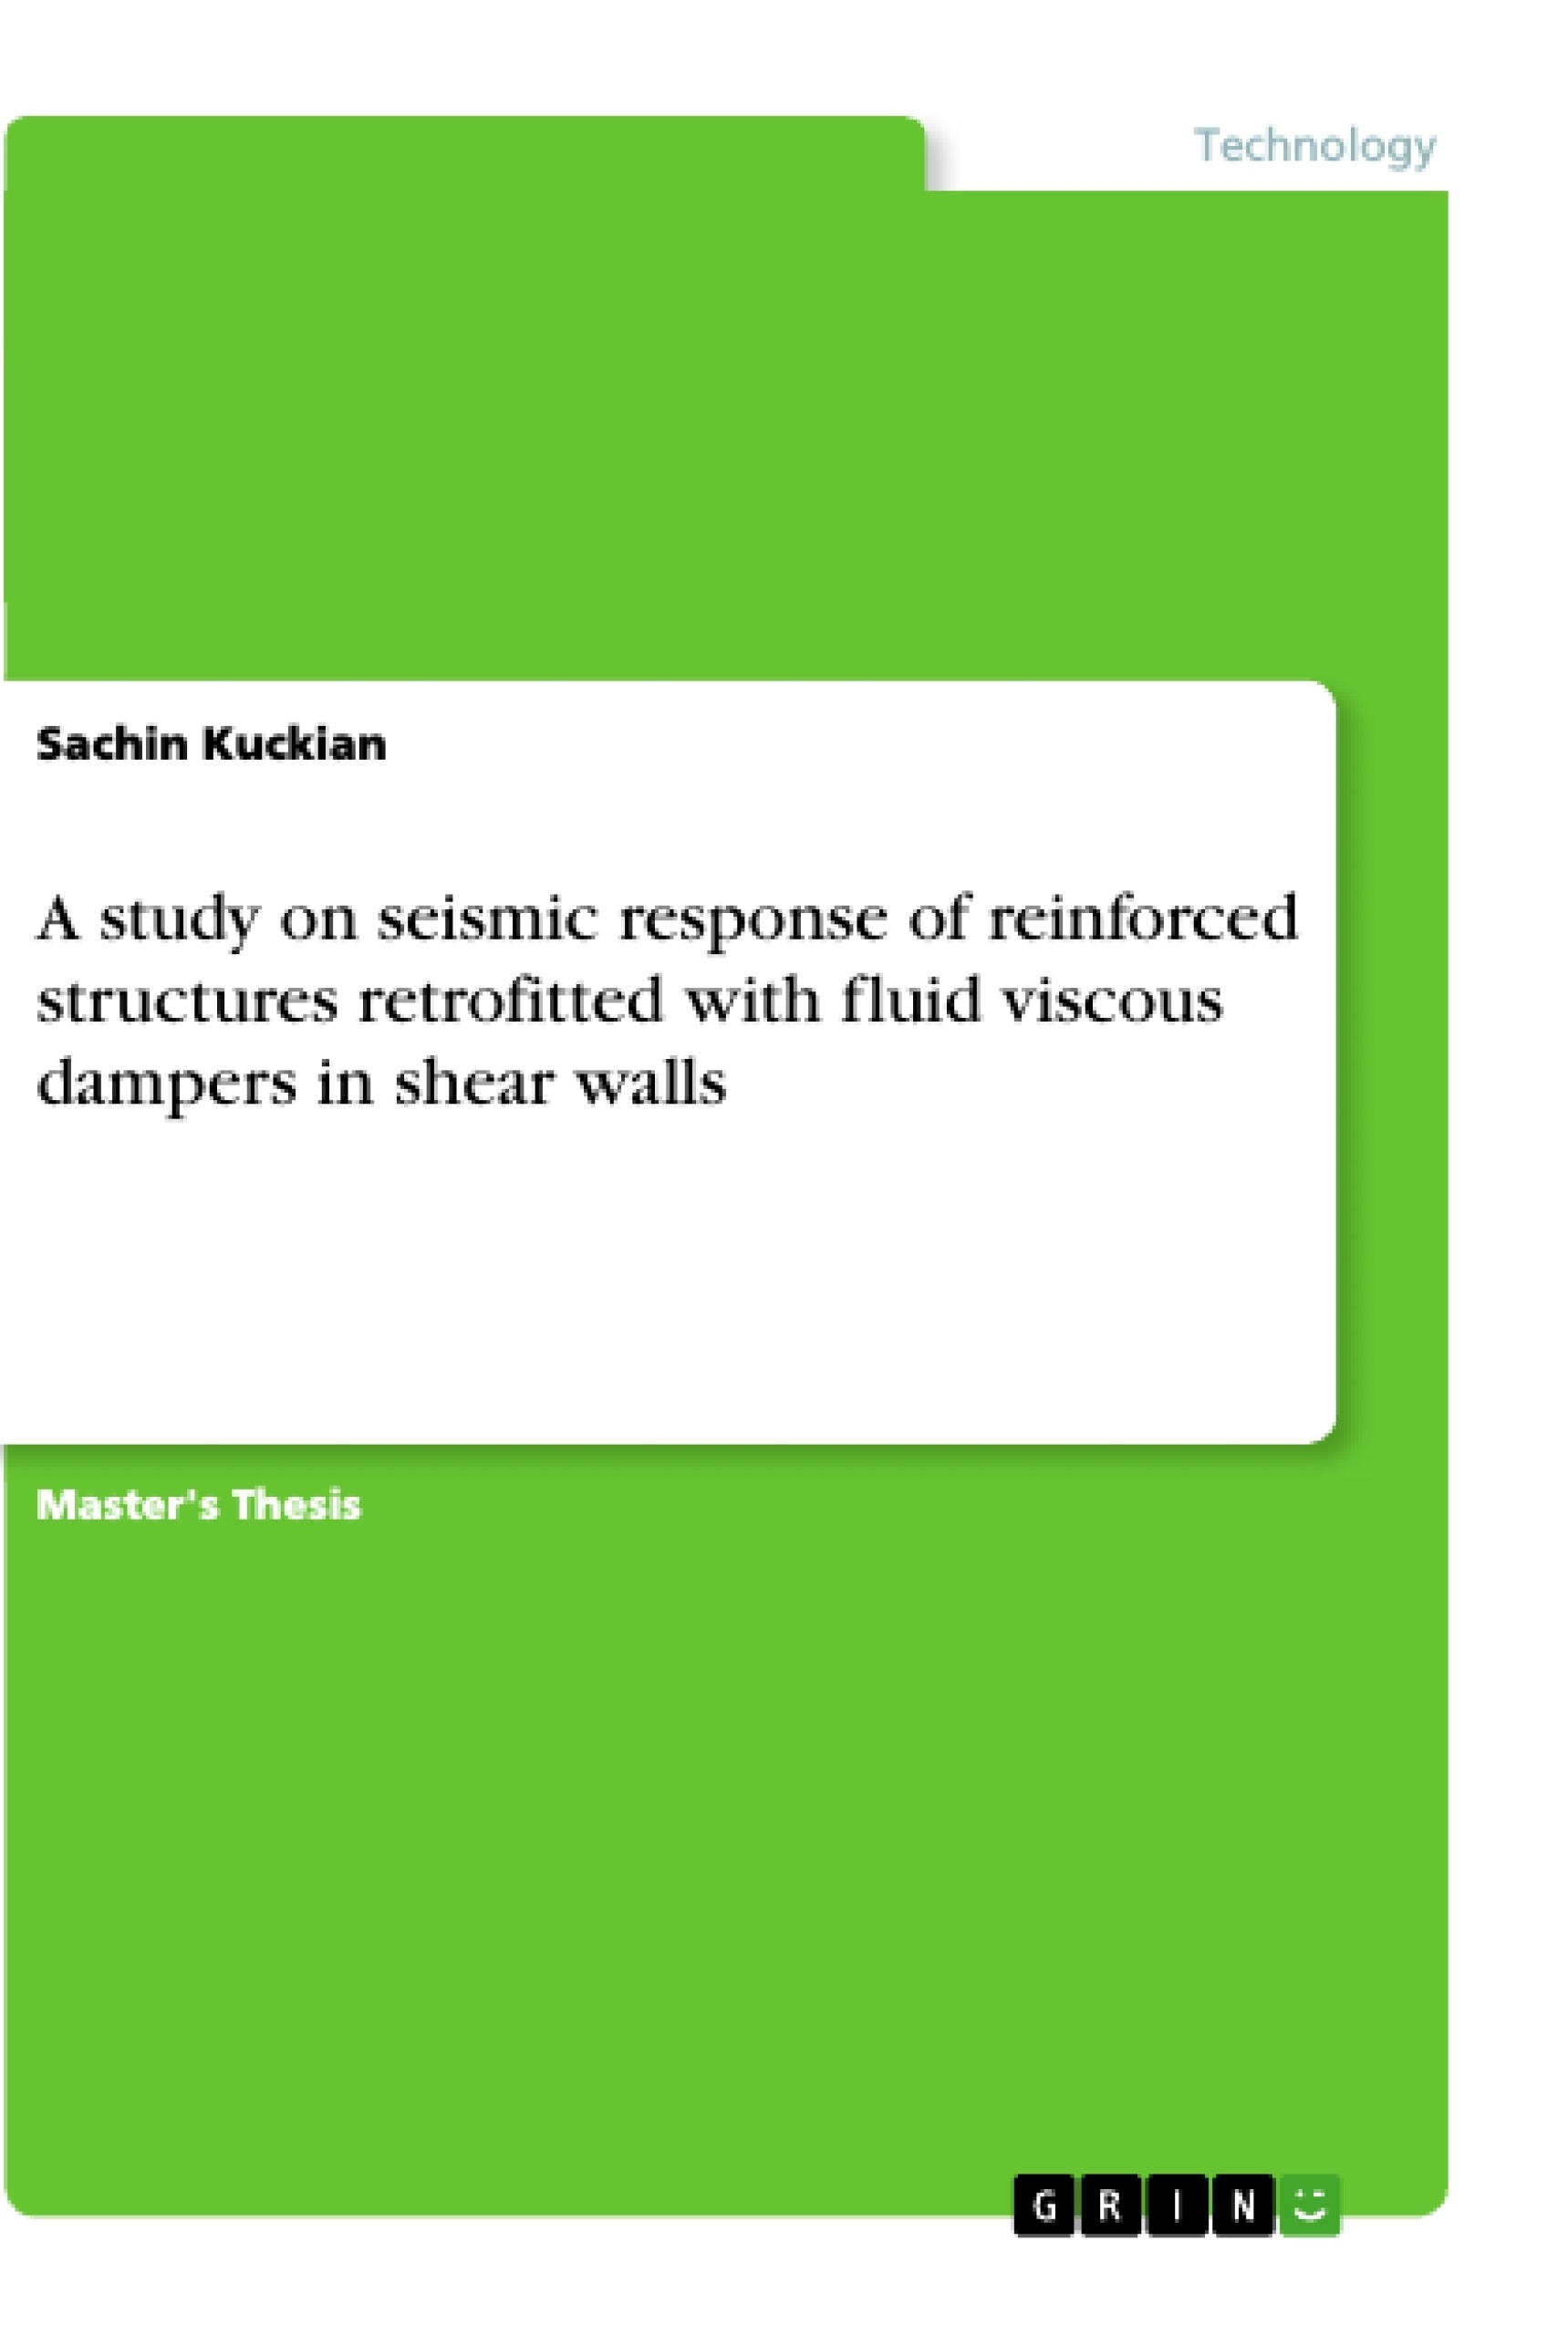 Title: A study on seismic response of reinforced structures retrofitted with fluid viscous dampers in shear walls